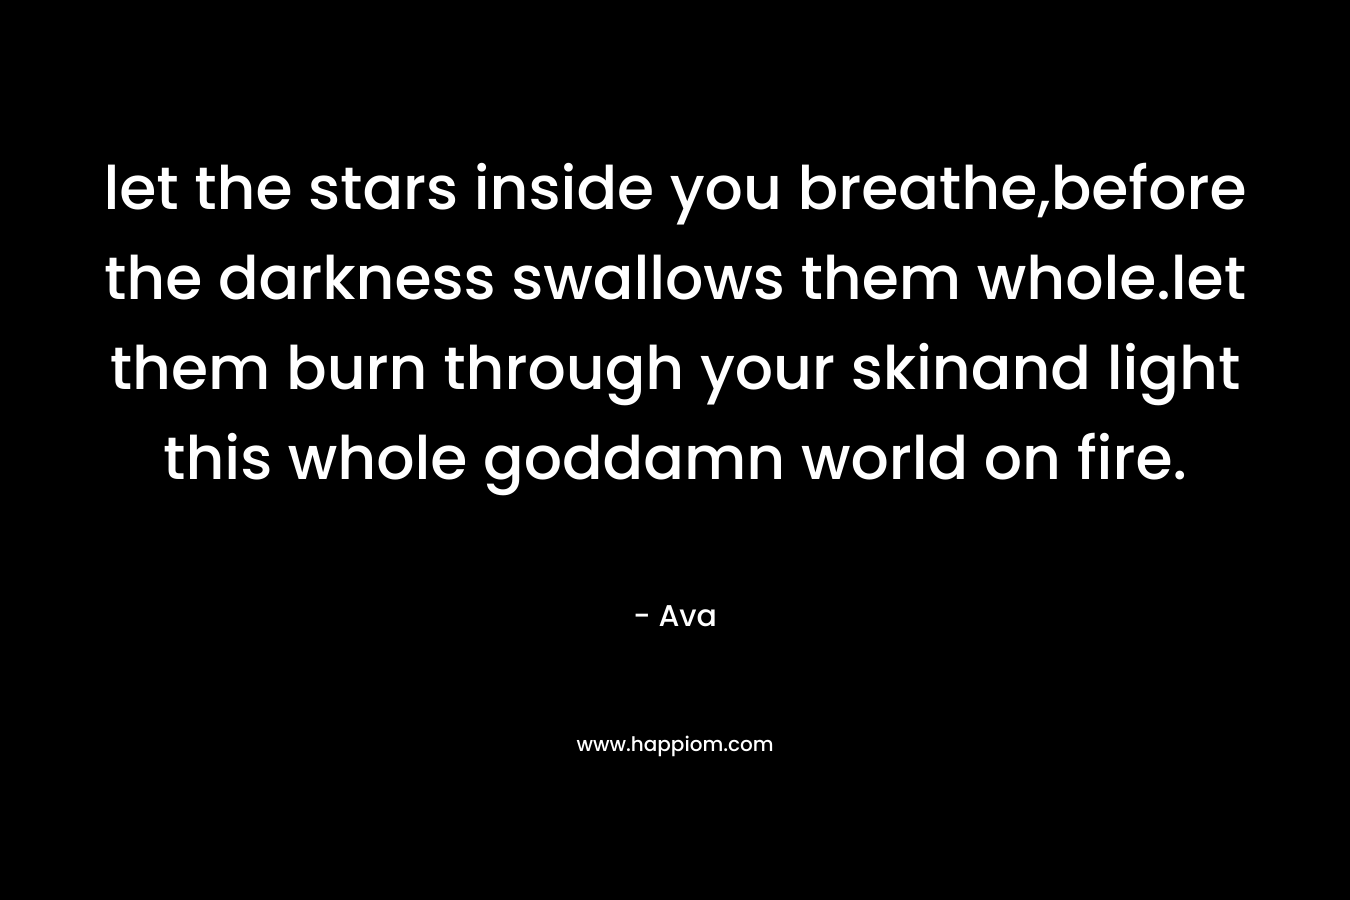 let the stars inside you breathe,before the darkness swallows them whole.let them burn through your skinand light this whole goddamn world on fire.